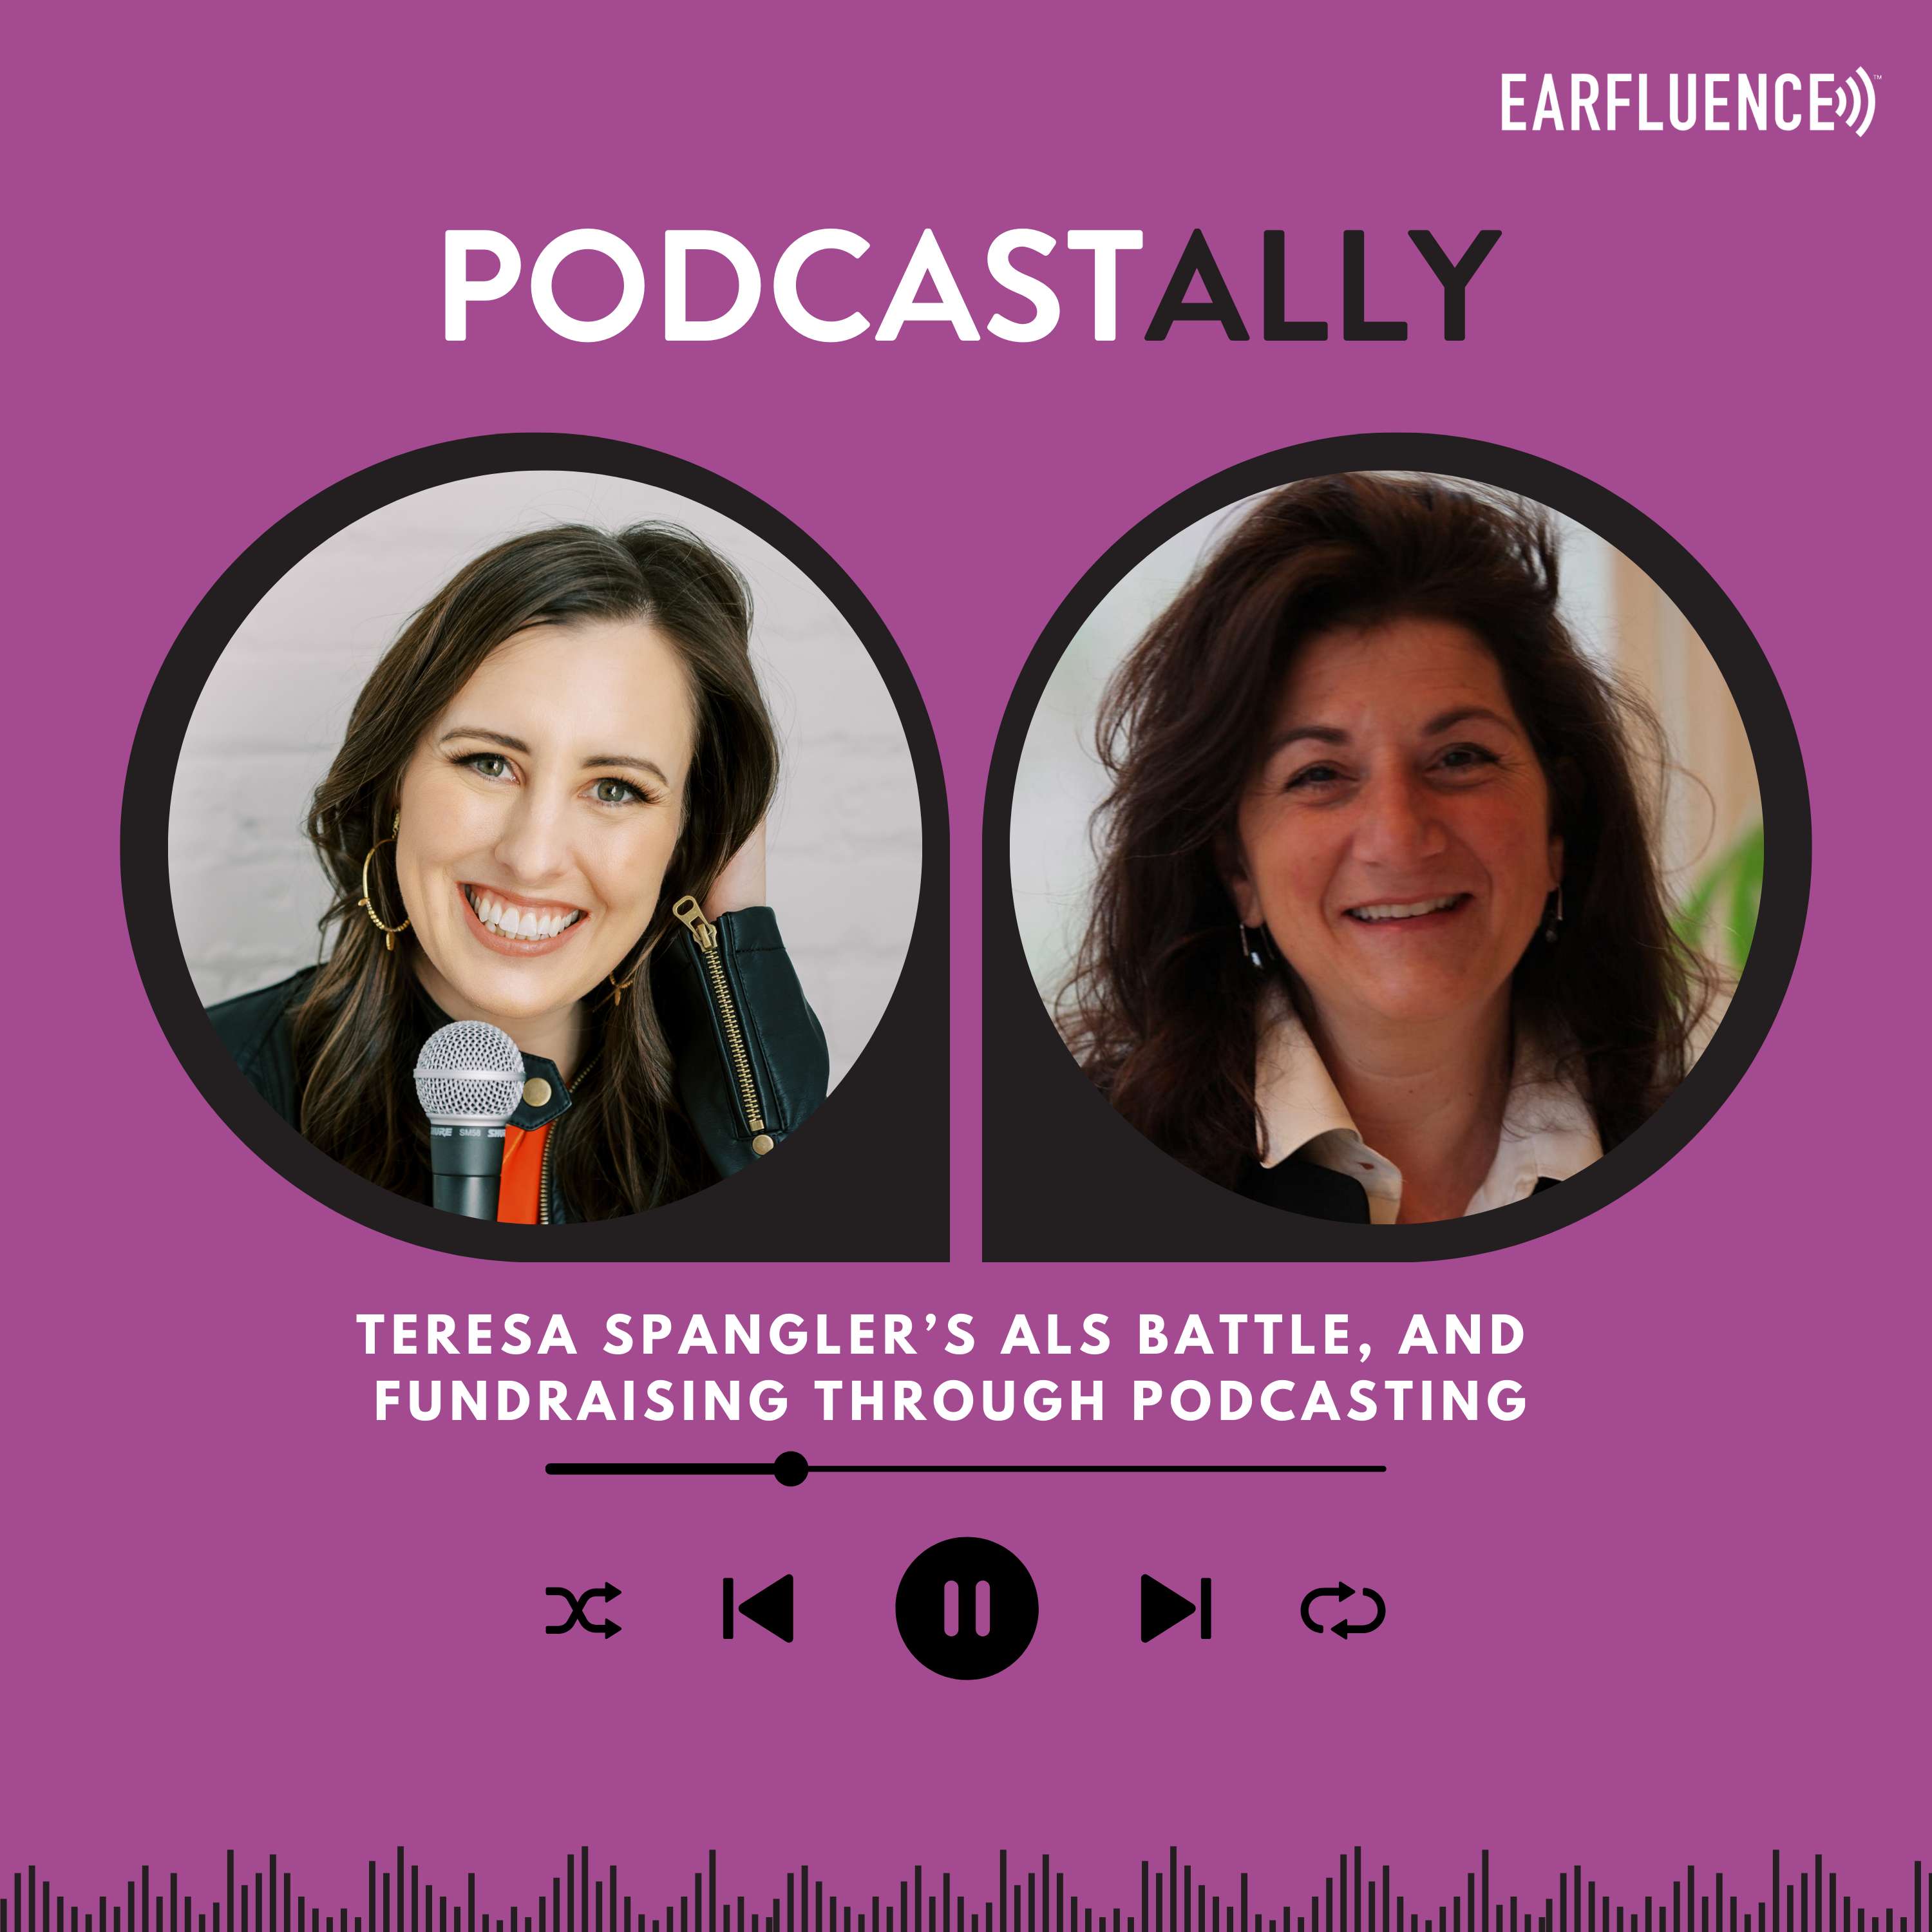 Podcasting for a Cause: Teresa Spangler’s Fight to Amplify ALS Awareness